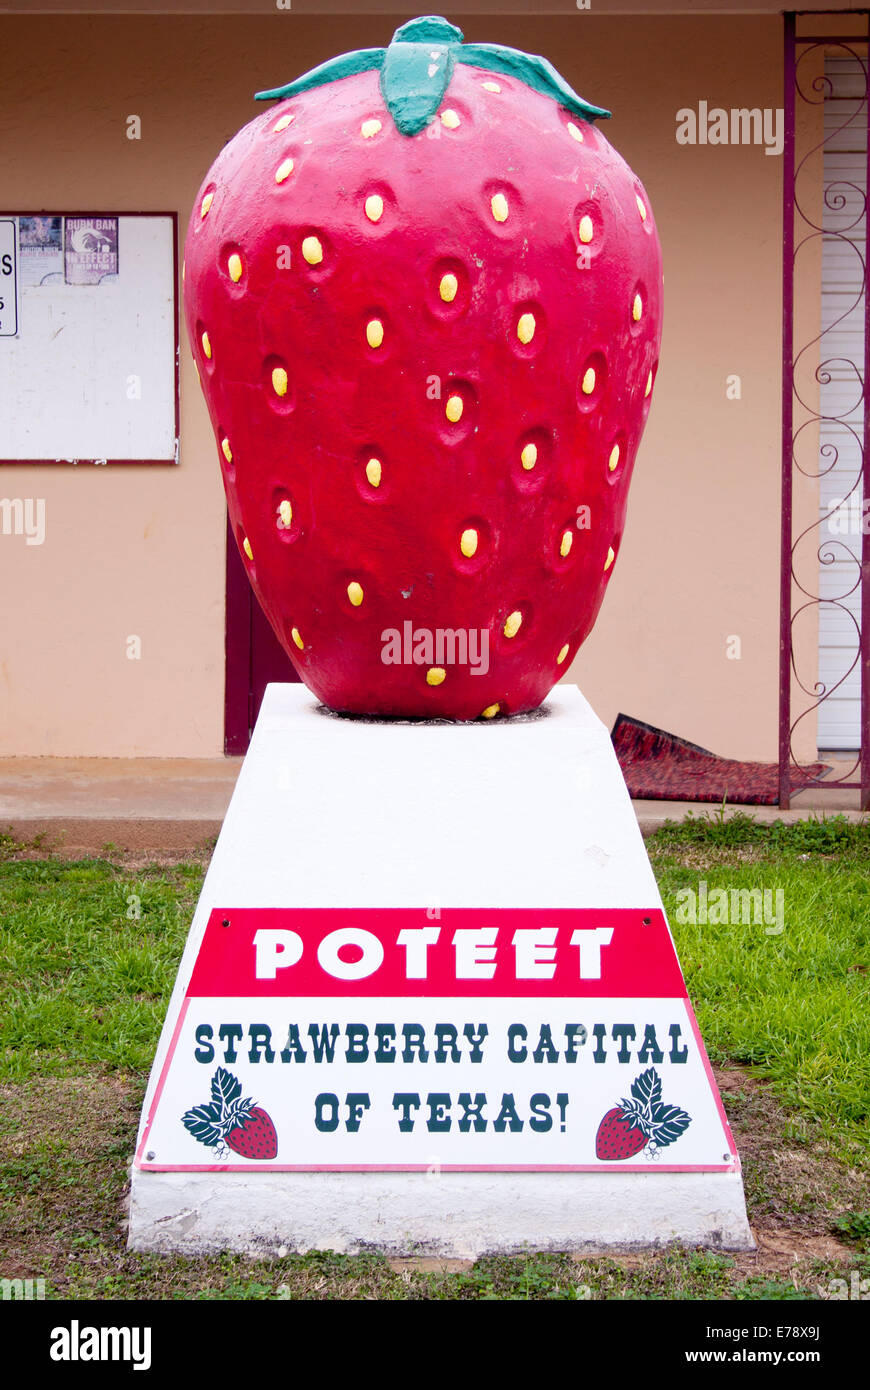 Poteet Strawberry Capital of Texas Banque D'Images